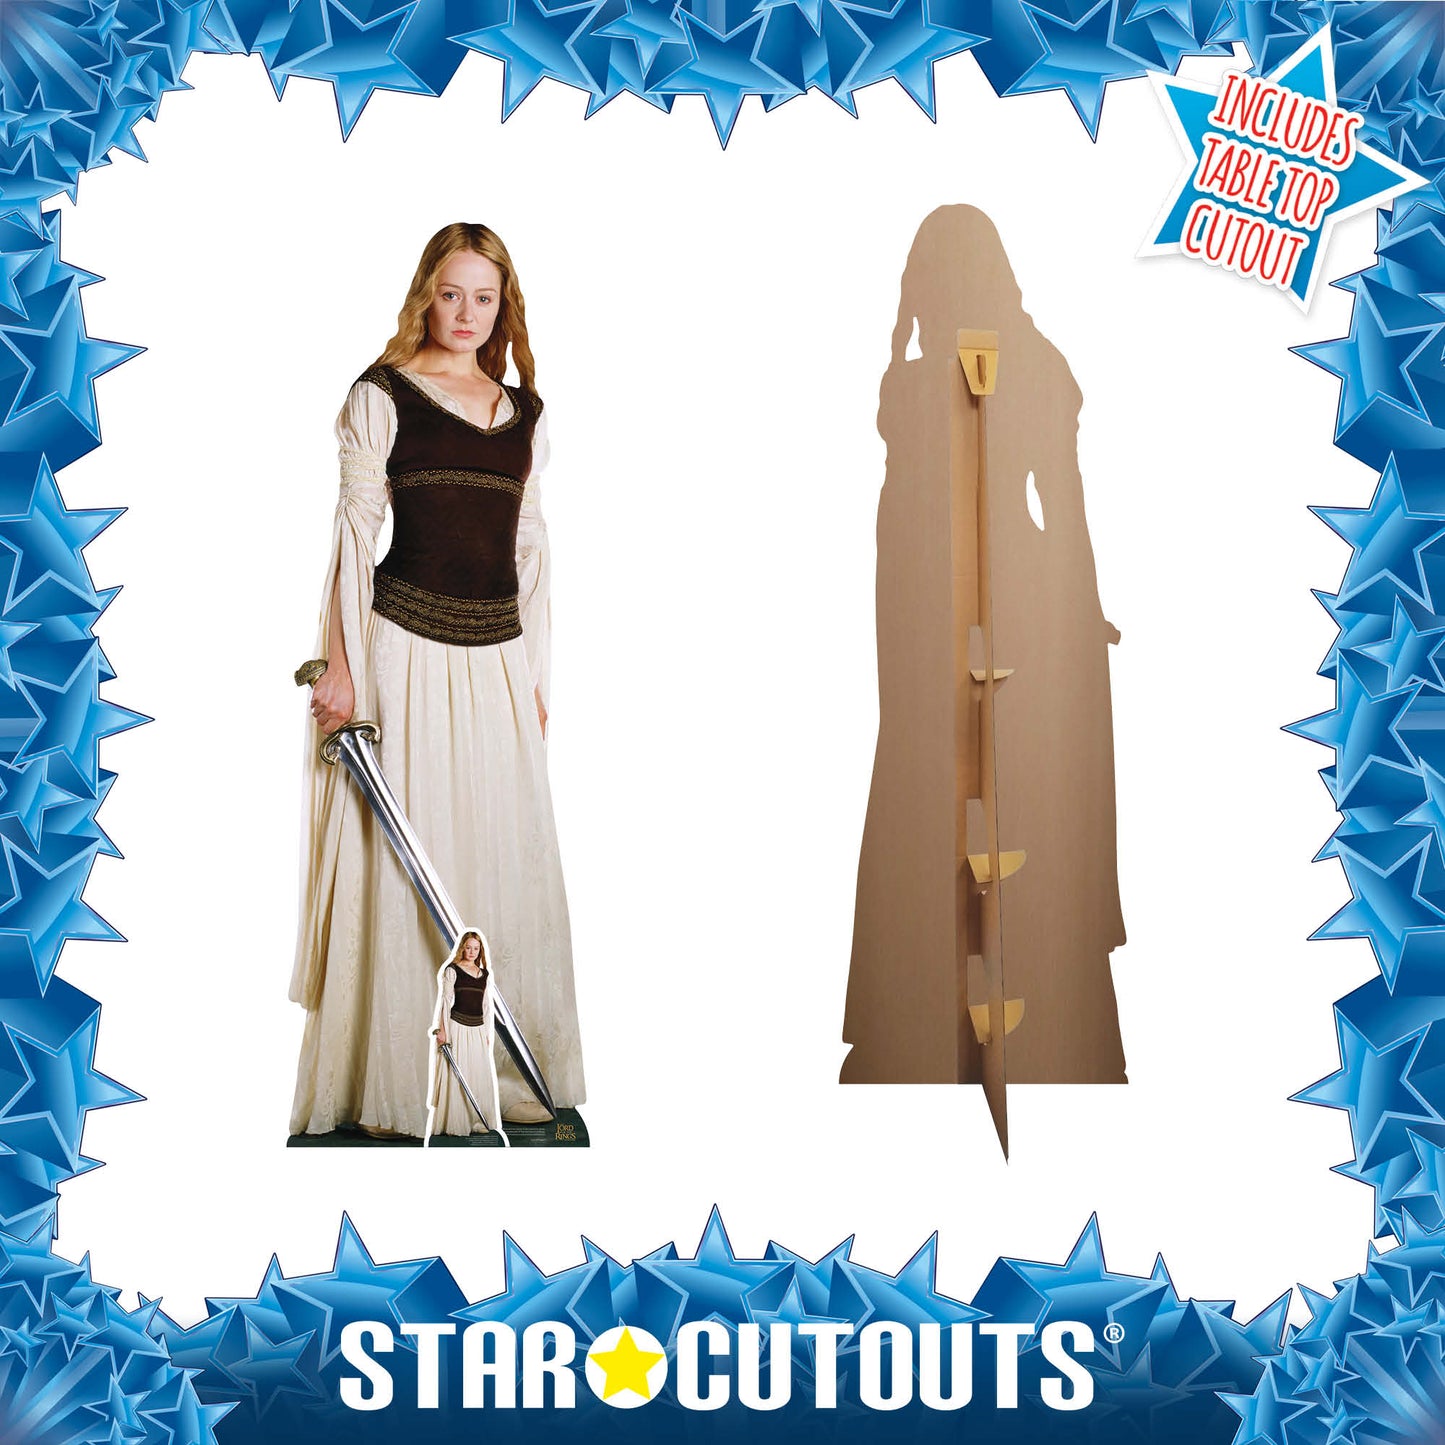 Eowyn The Lord of the Rings Cardboard Cutout Lifesize